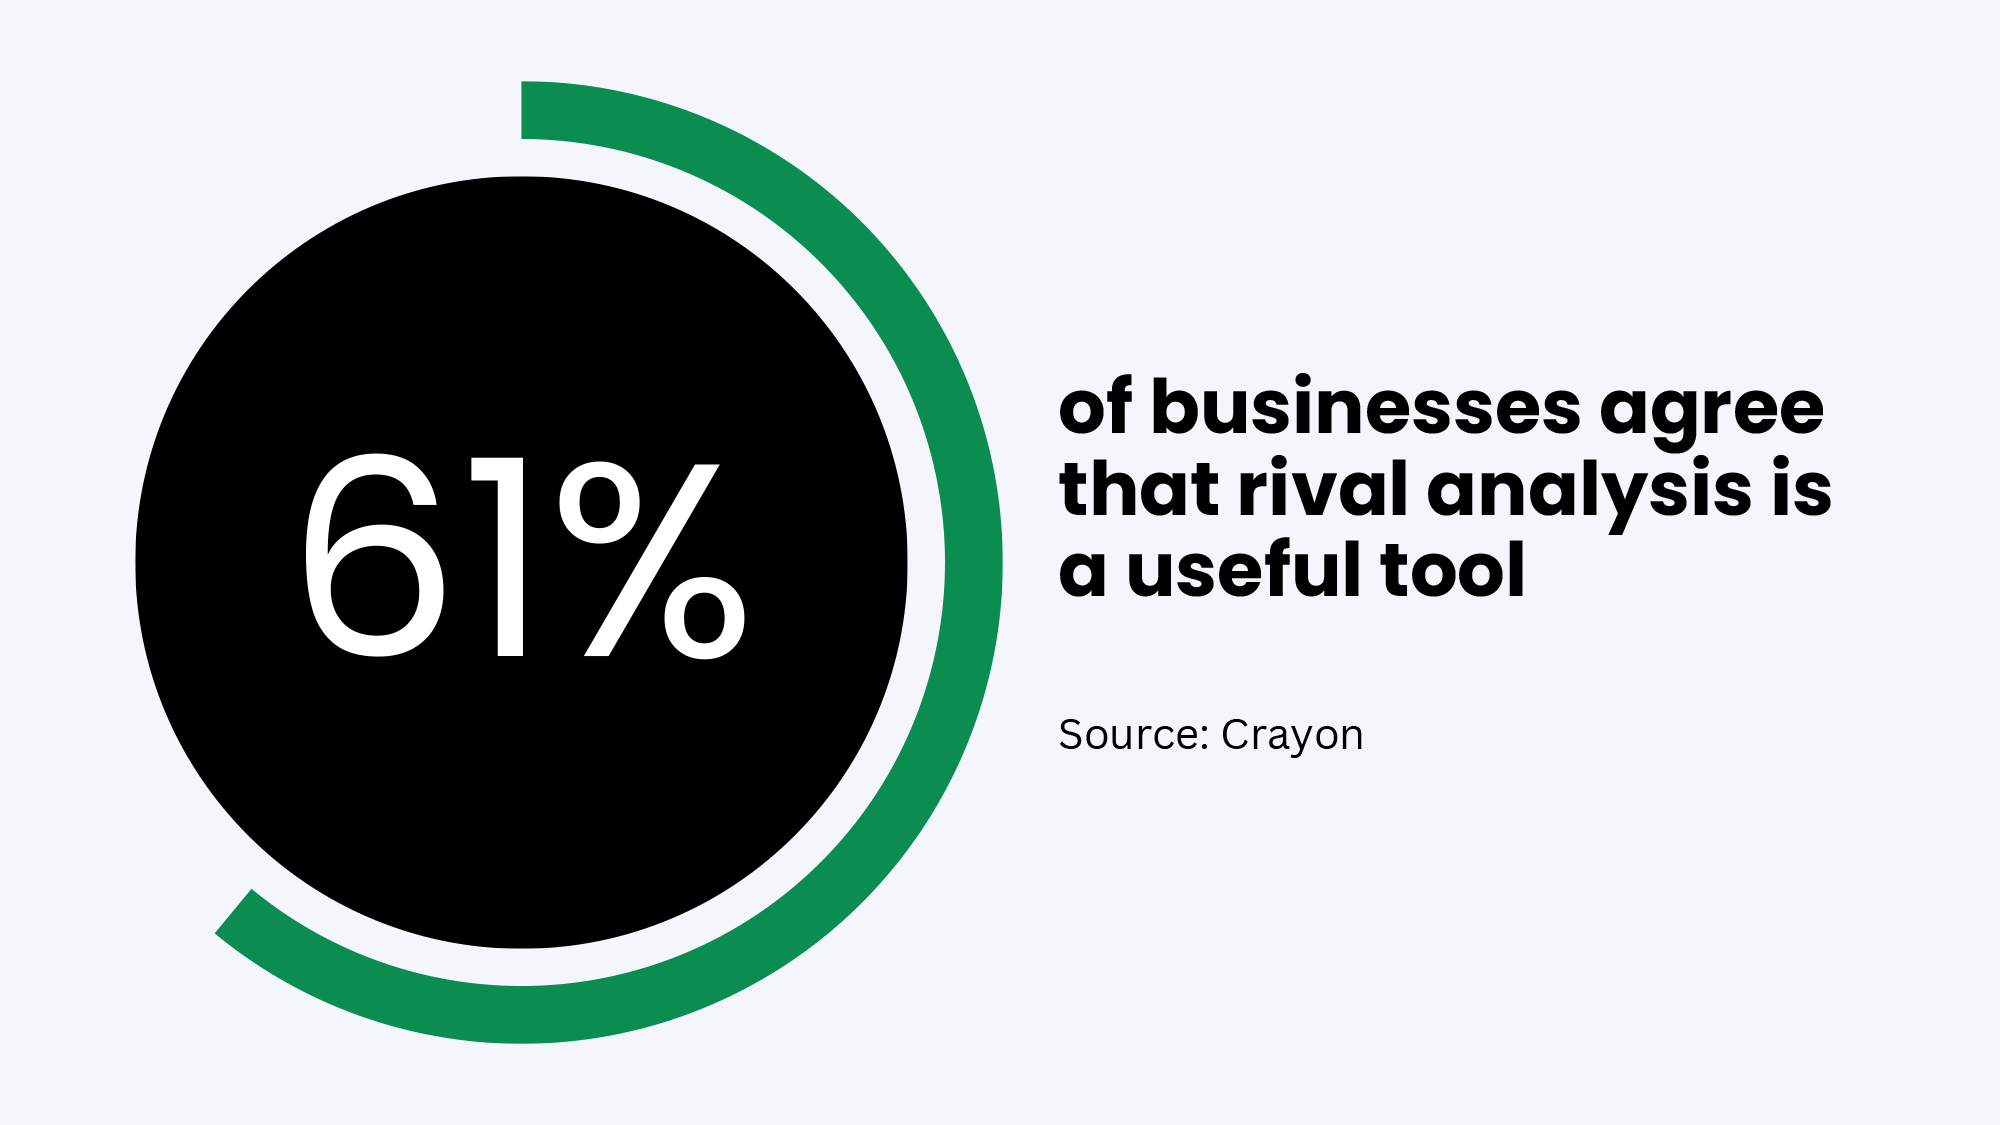 61% of businesses agree that rival analysis is a useful tool